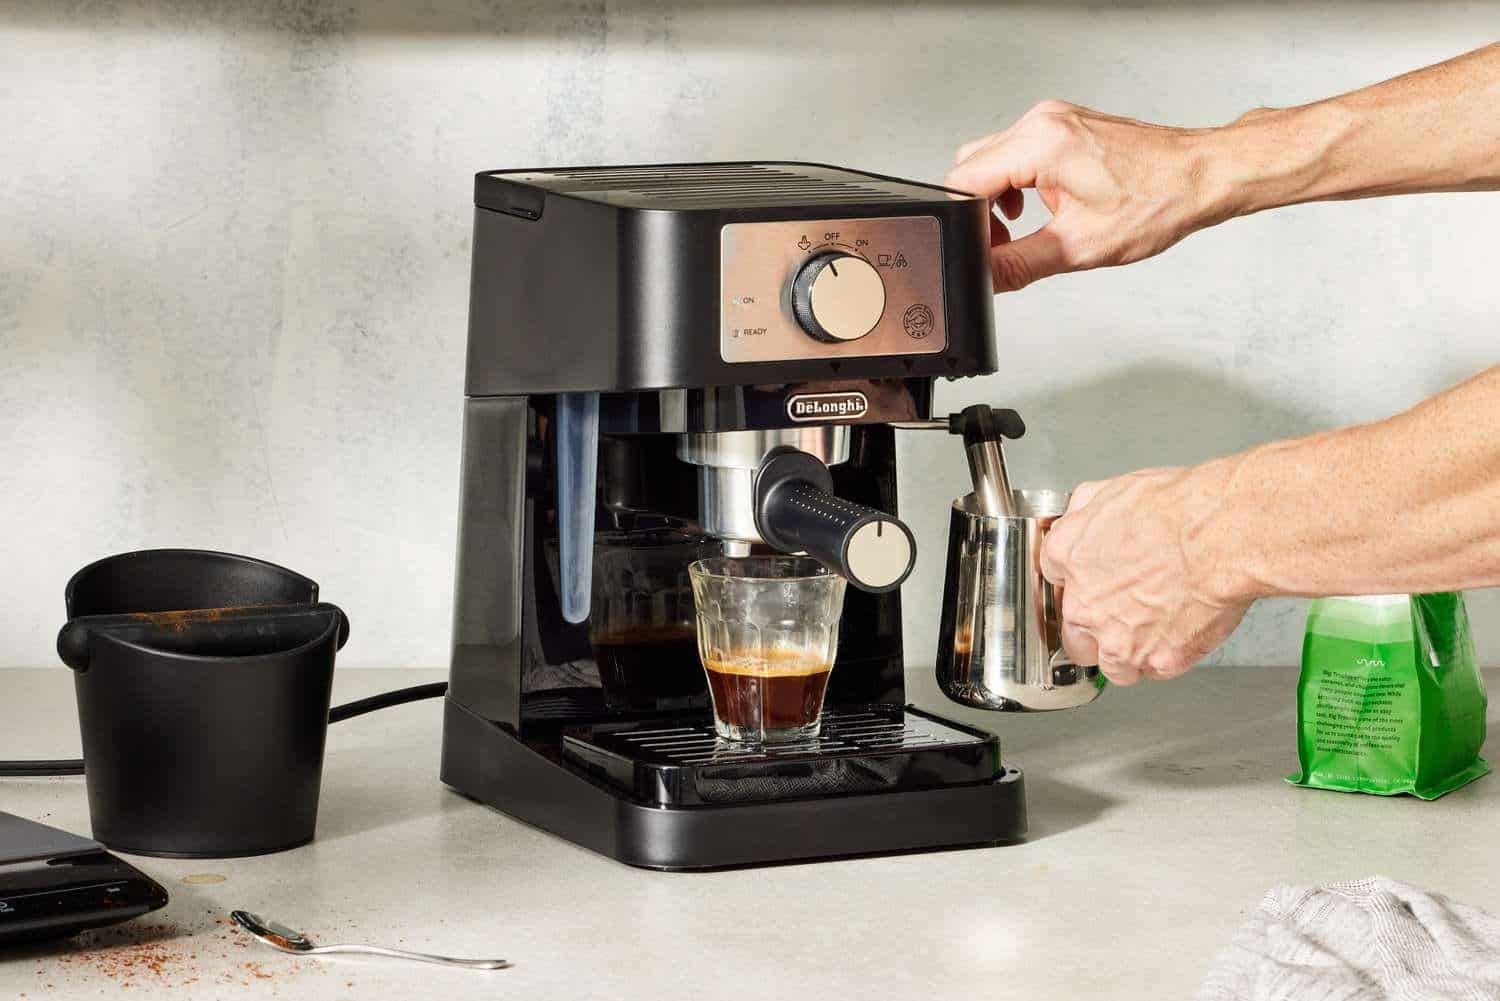 Guide to brewing espresso at home